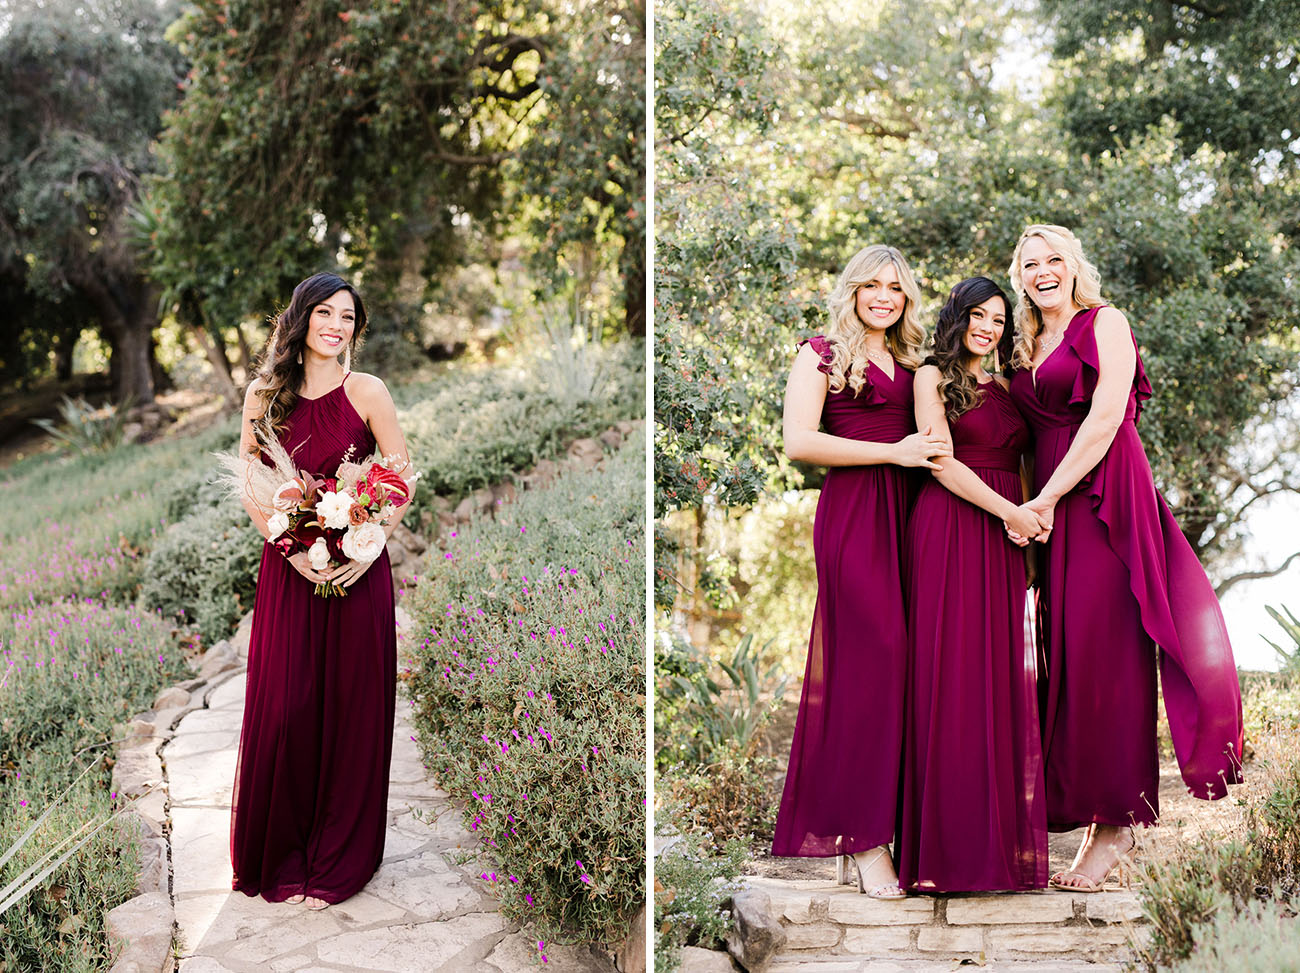 Reverie Spring 2018 Bridesmaids Collection from David's Bridal